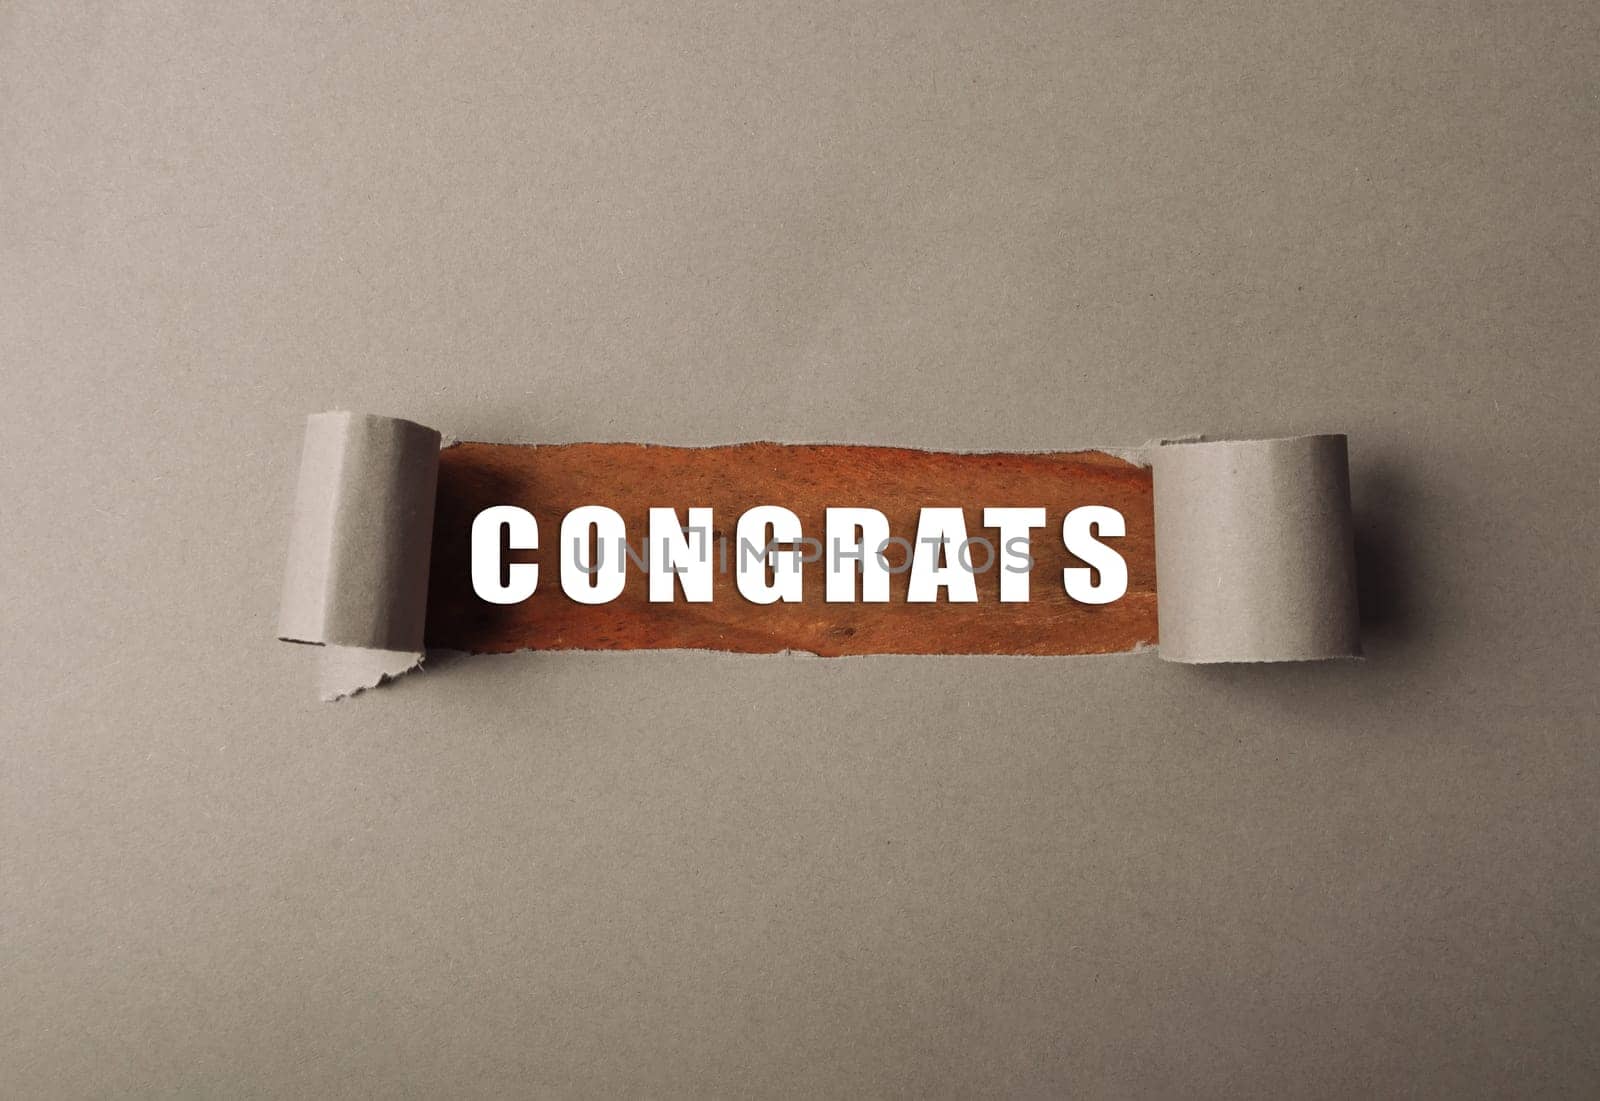 A torn piece of paper with the word congratulations written on it. The image has a sense of celebration and achievement